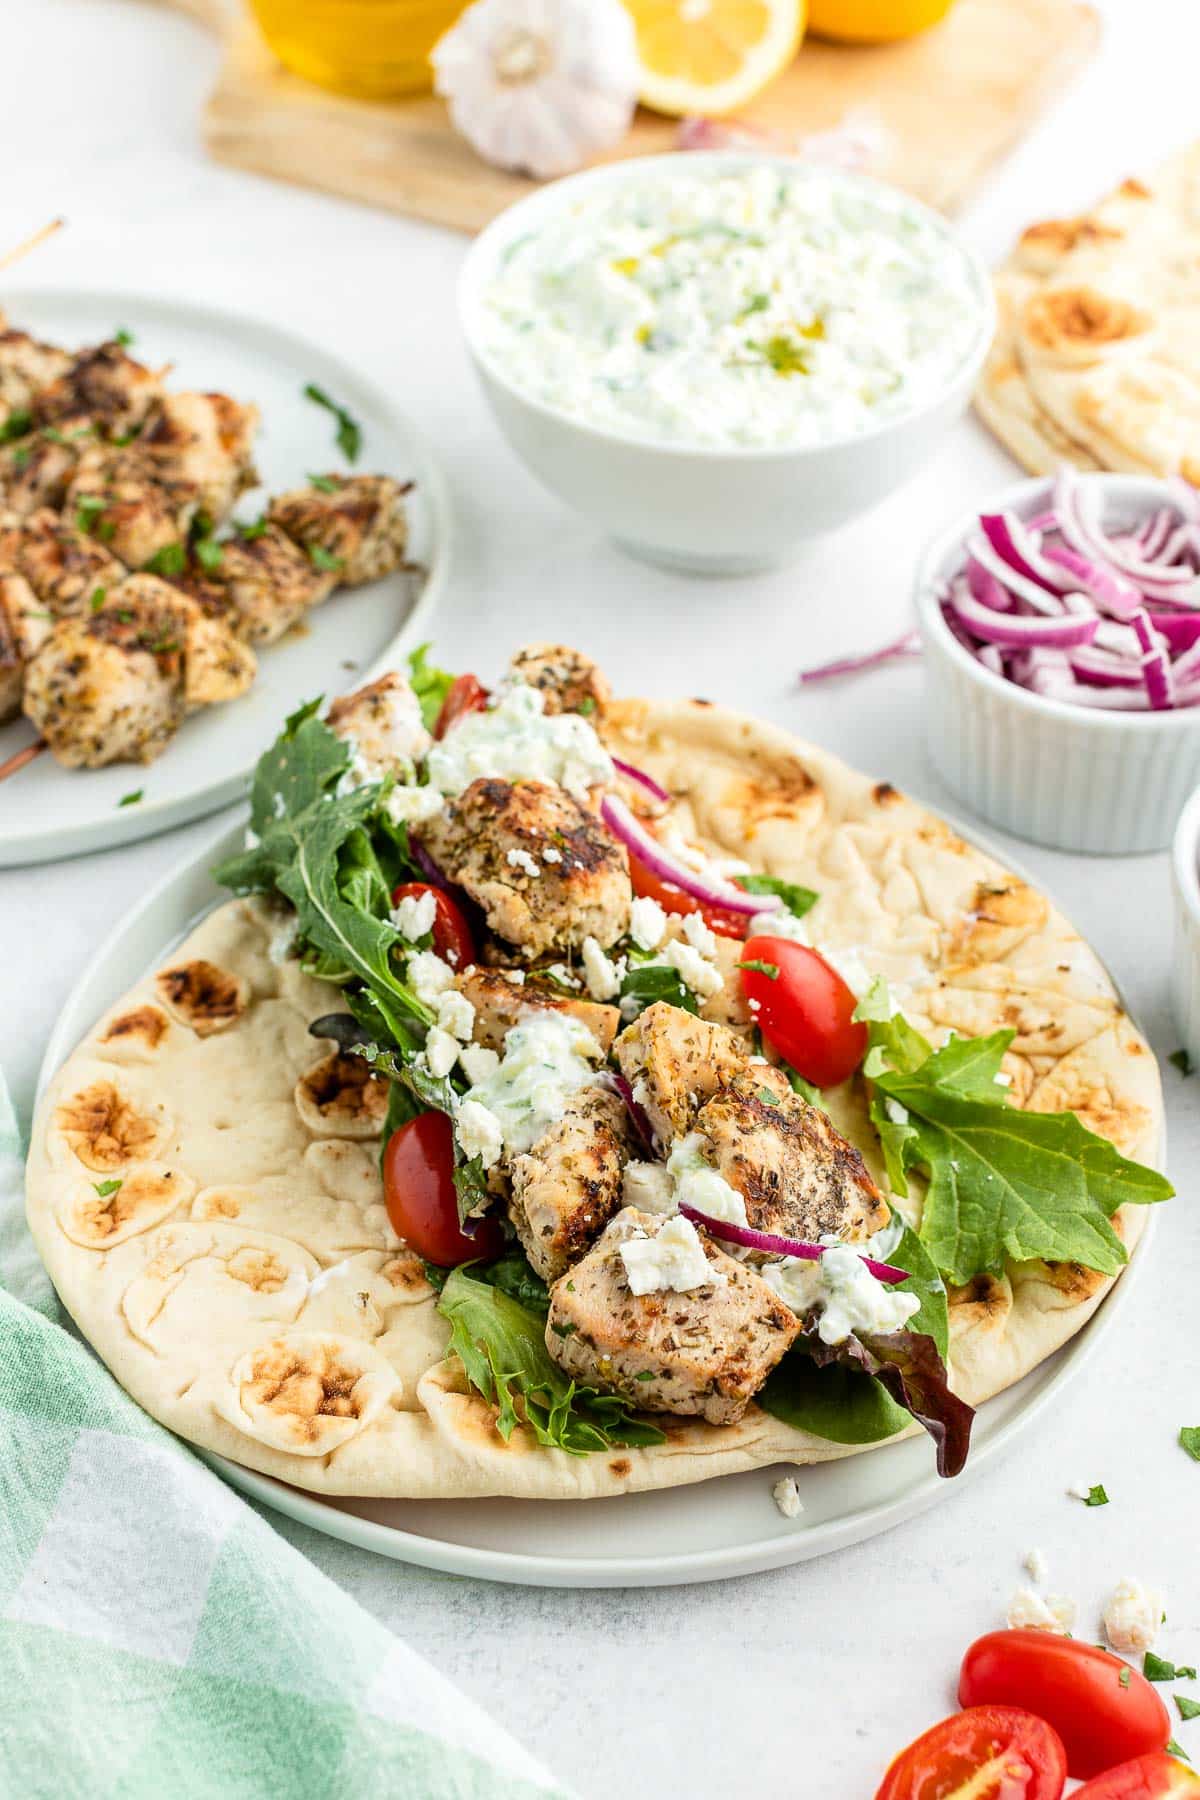 grilled chicken souvlaki, vegetables and feta cheese on soft flatbread